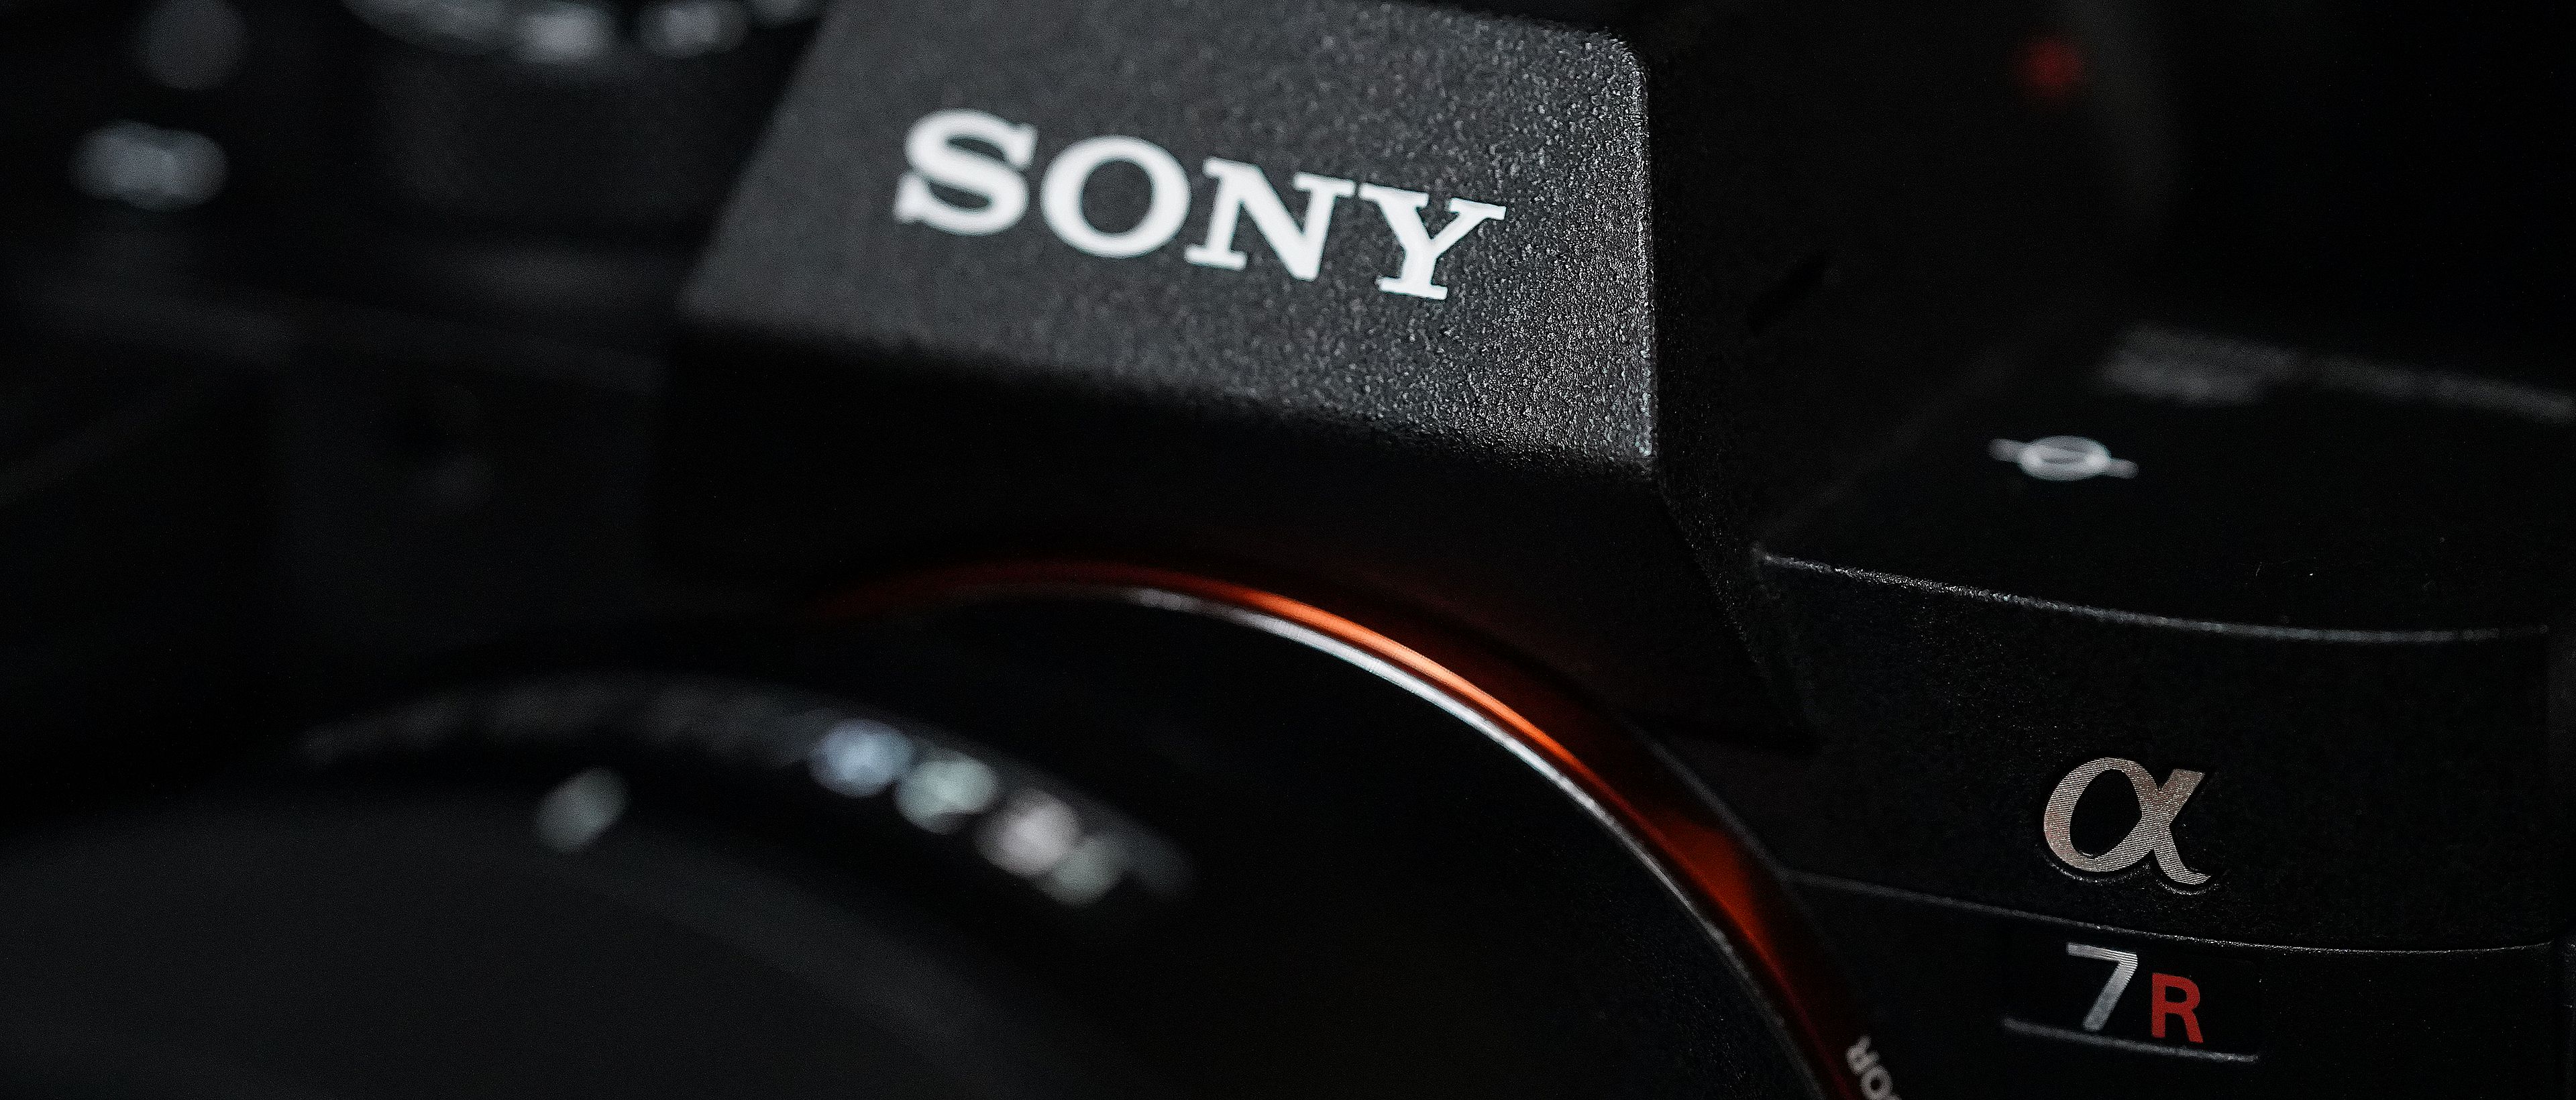 Preview Image: Sony a7rm4 – hands-on